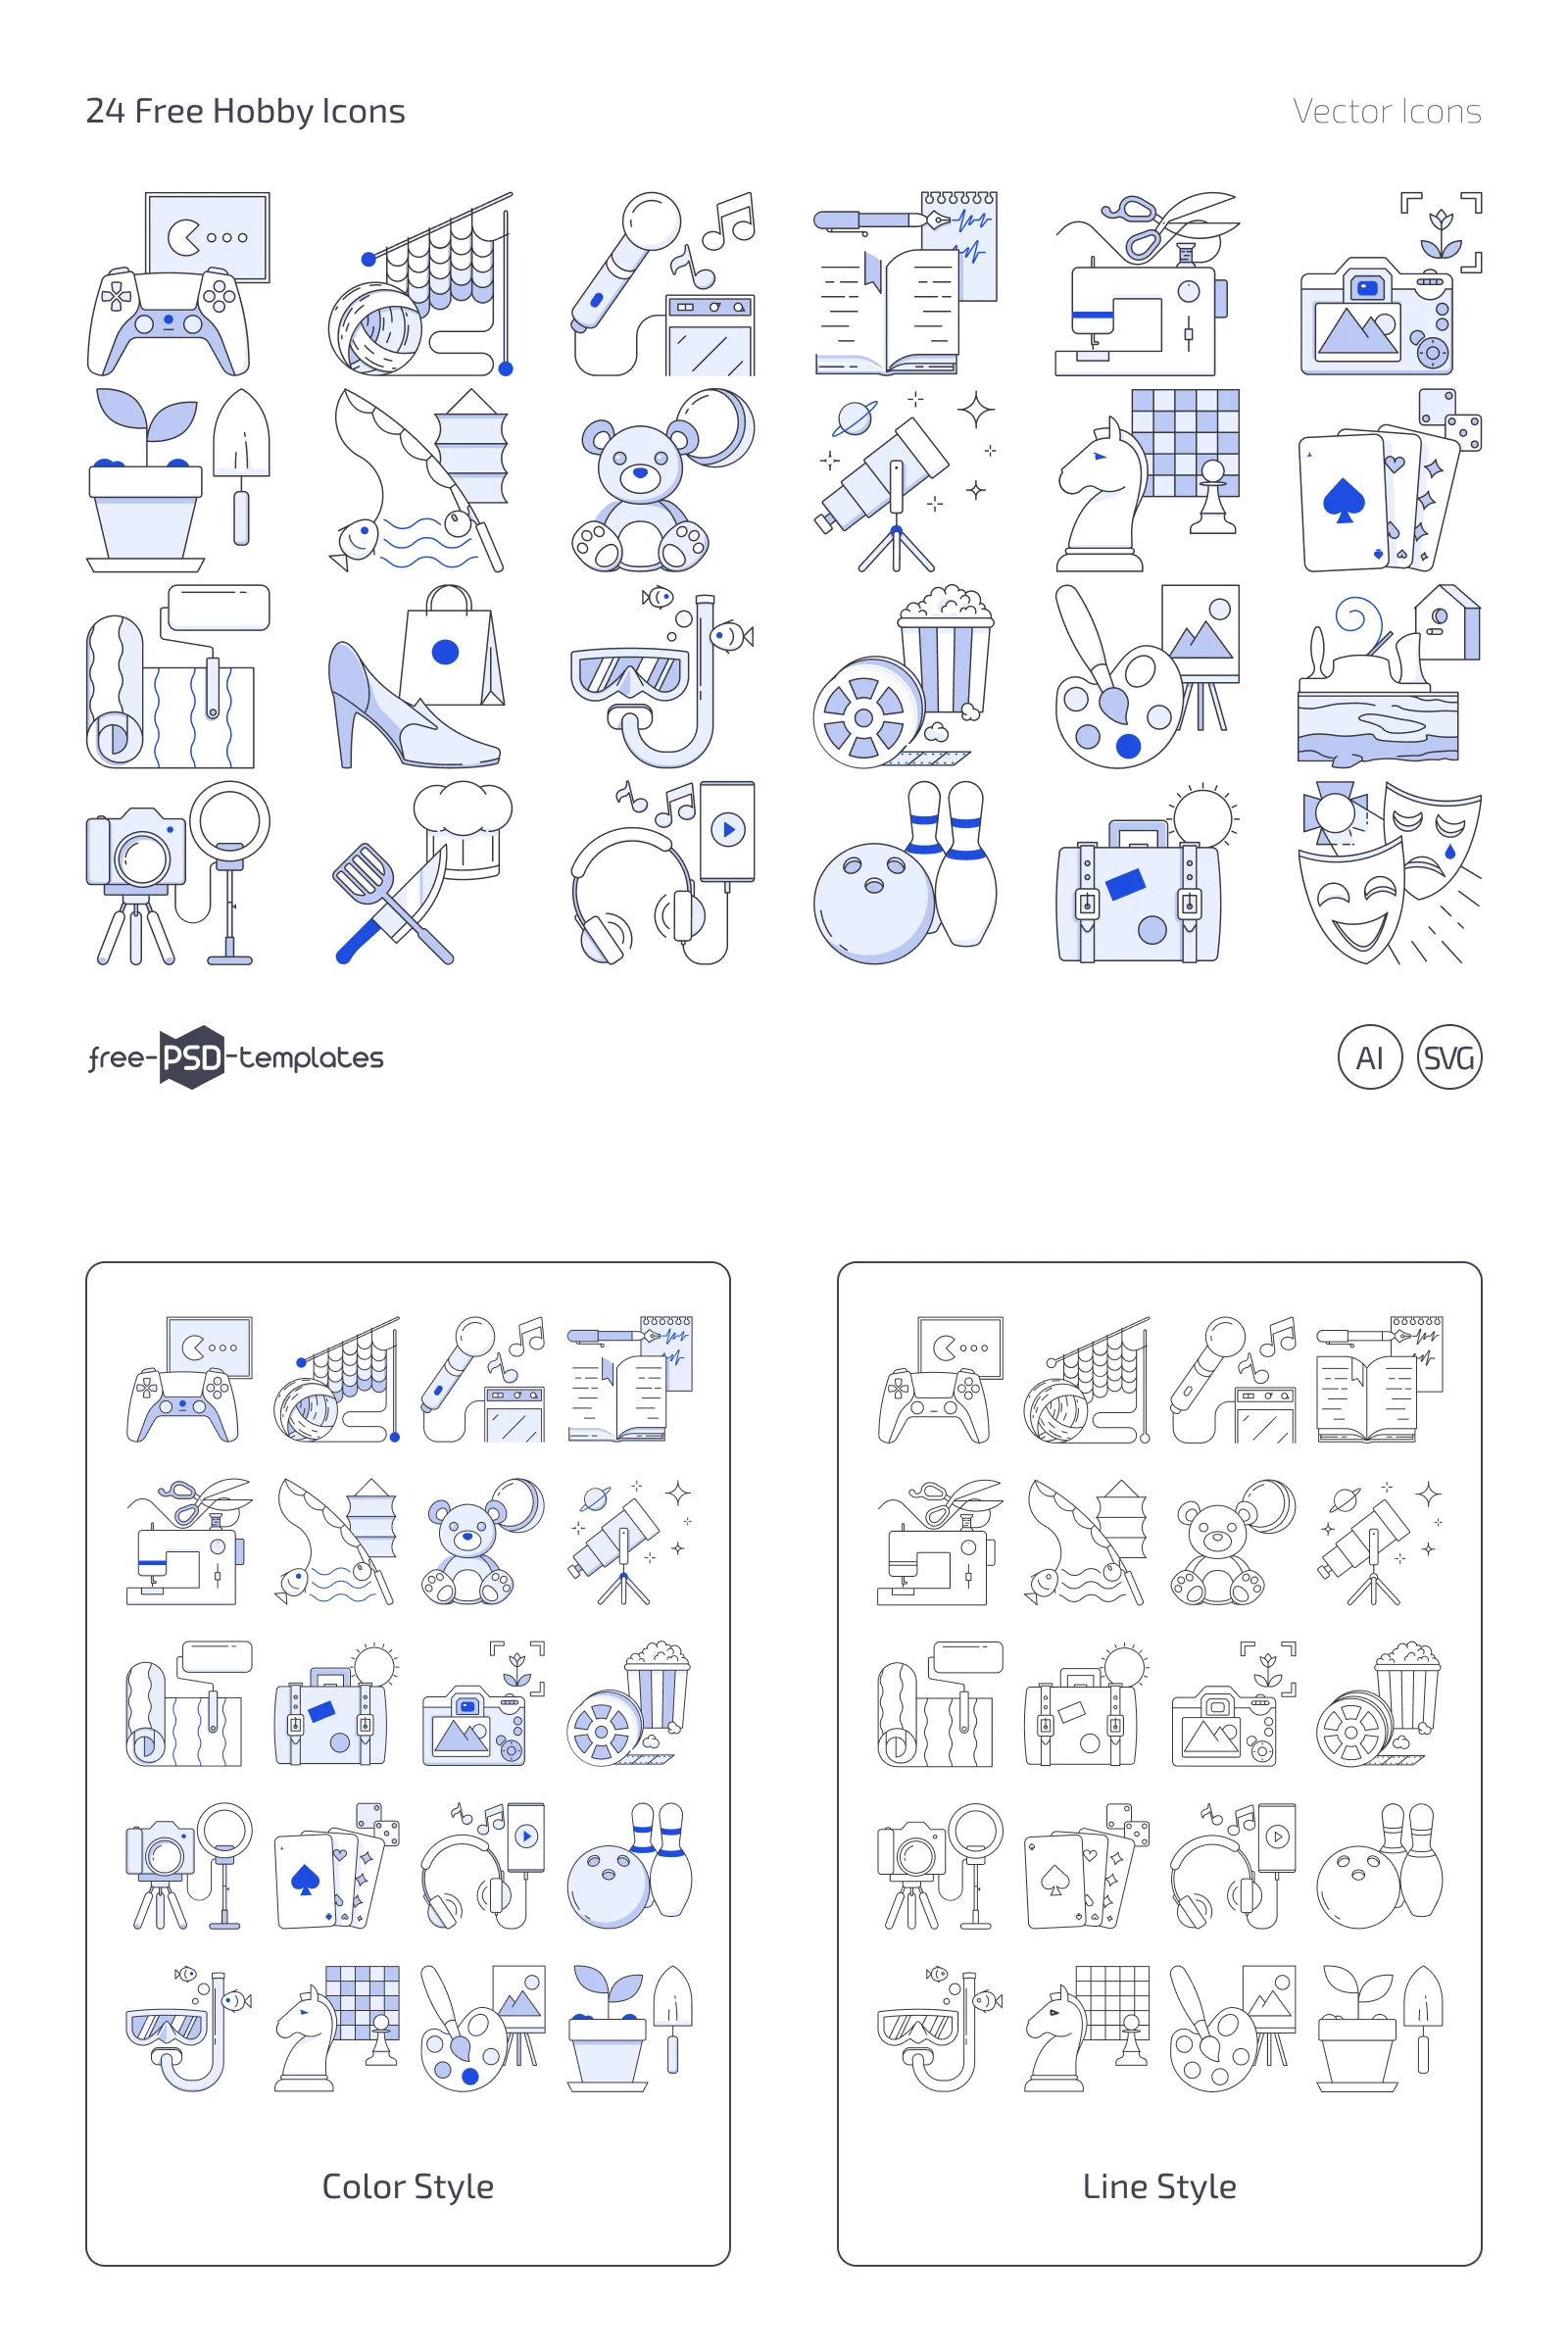 24 Free Vector Hobby Icons (SVG, AI)